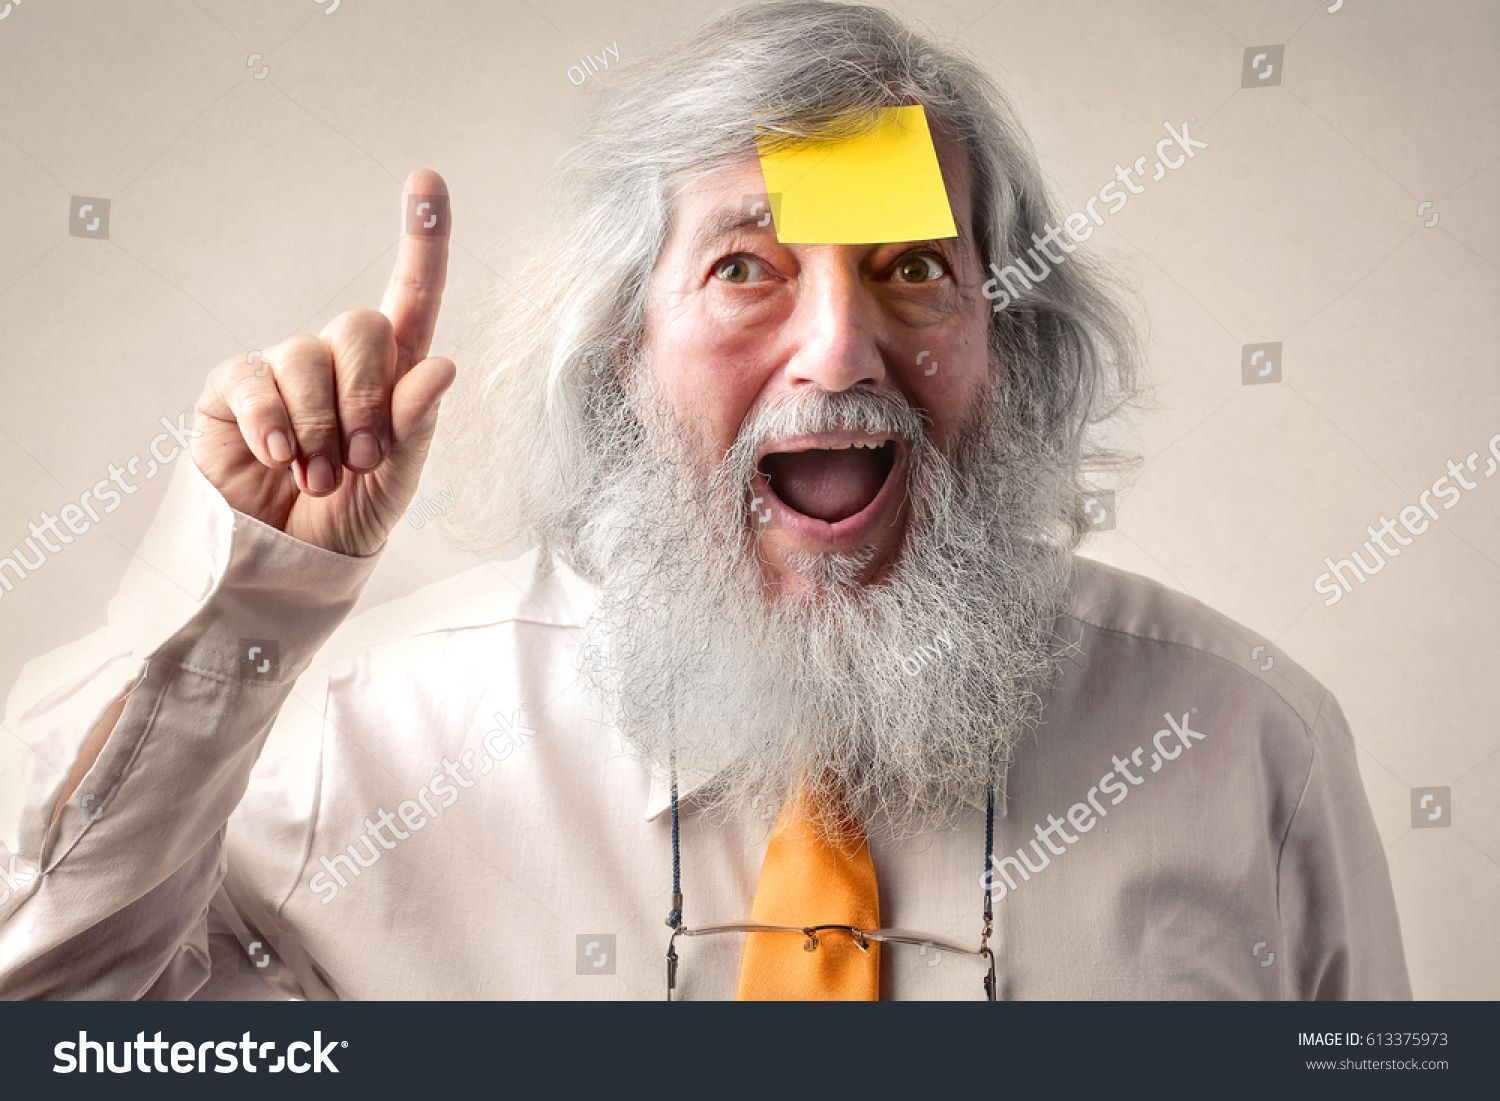 Excited elderly man with a sticky note on his forehead #613375973